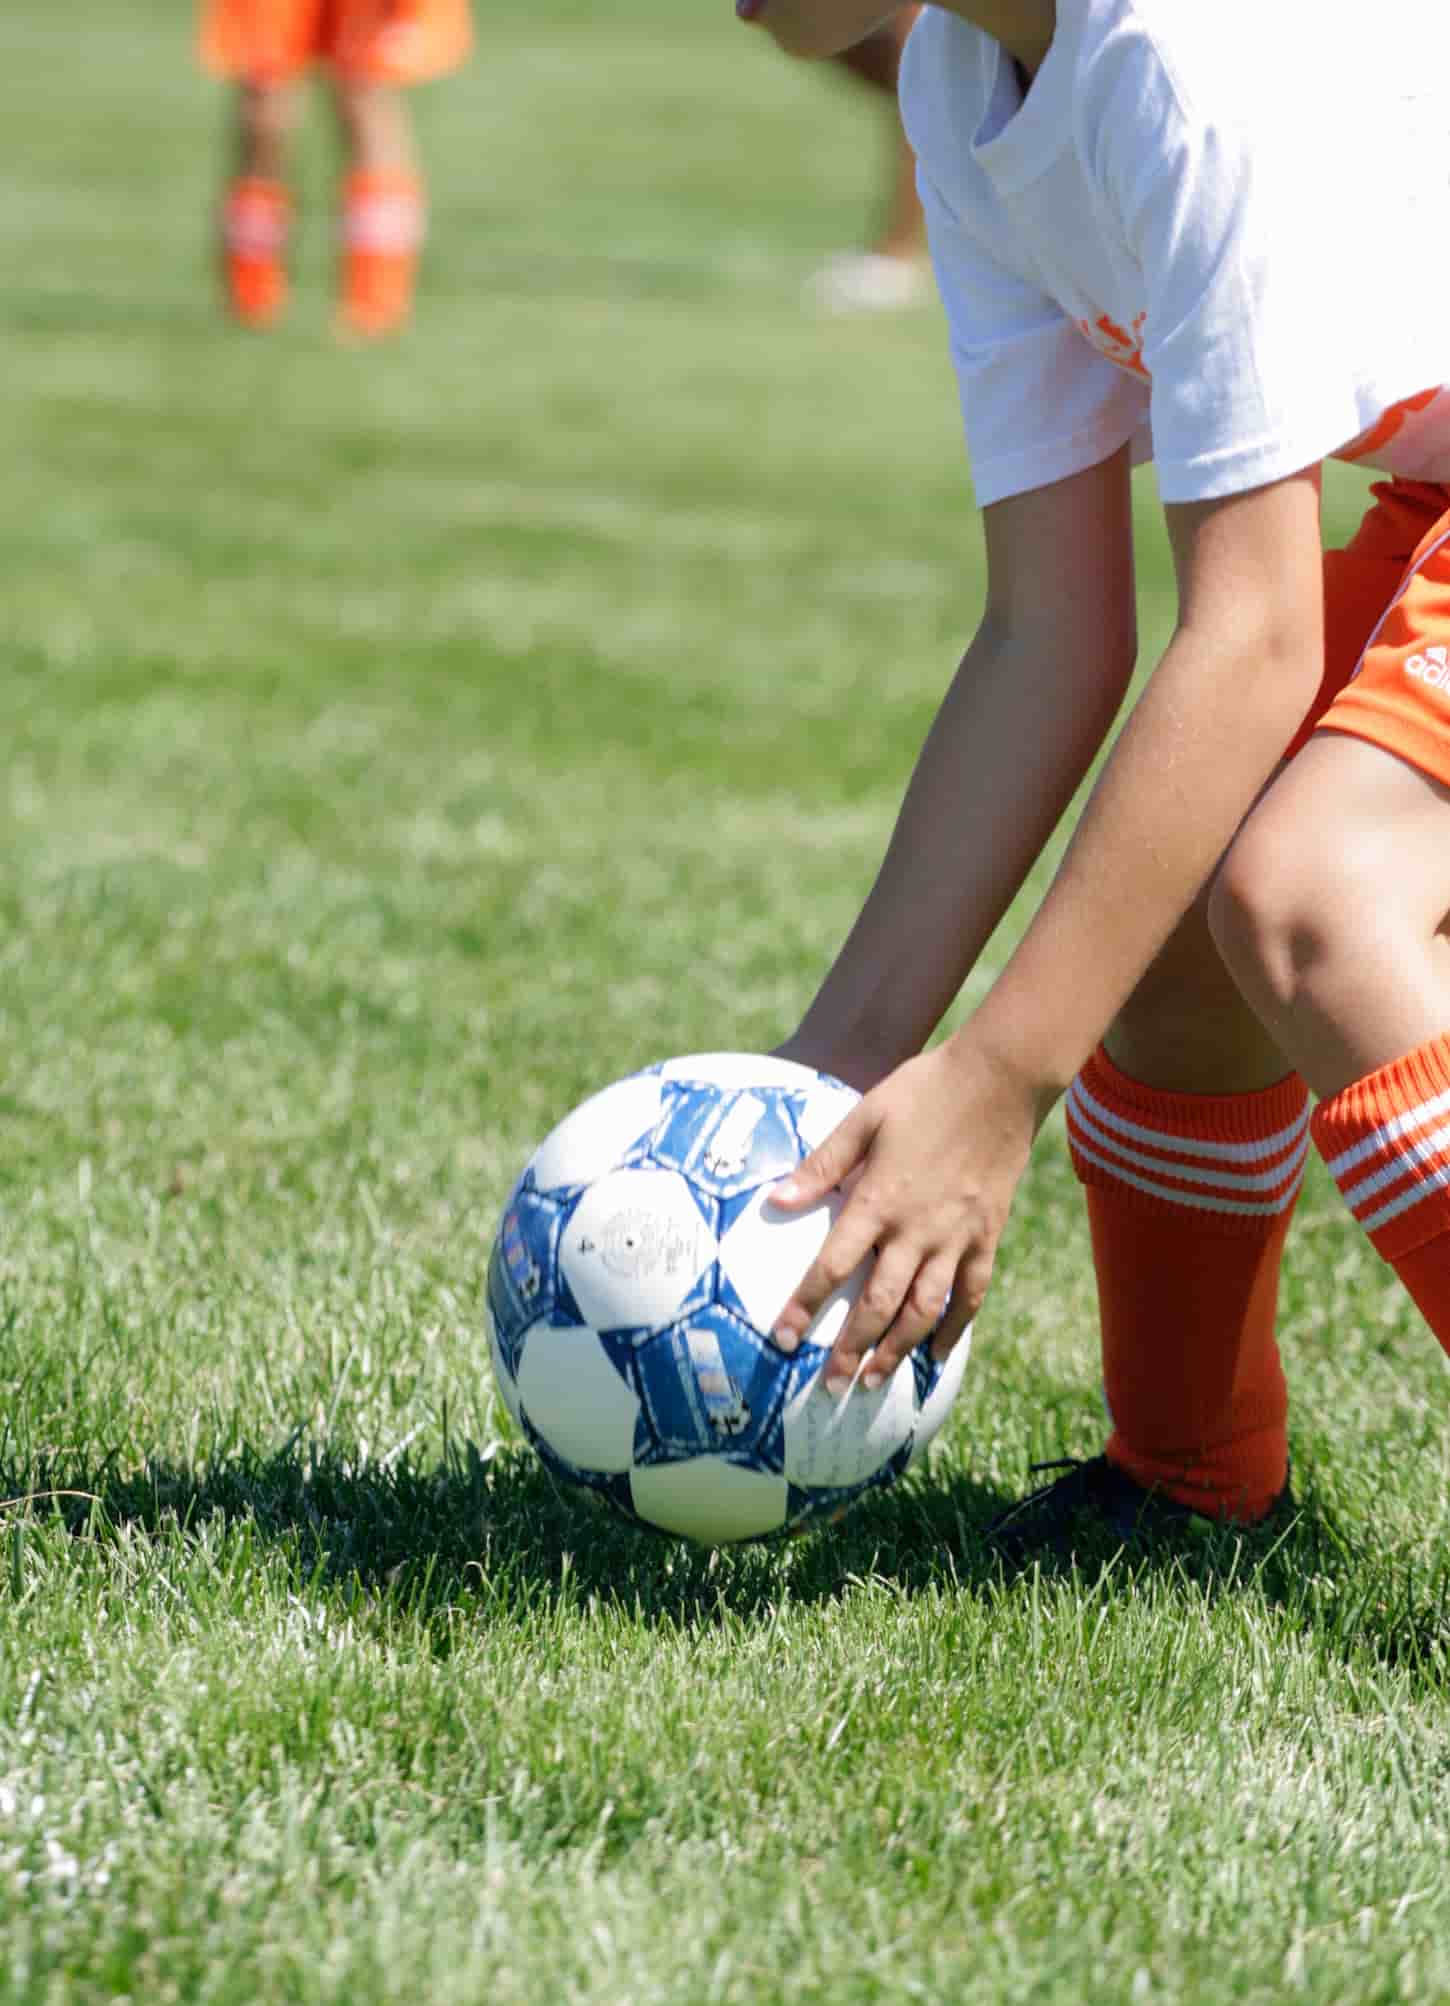 An image of a toddler on the field holding a soccer ball.